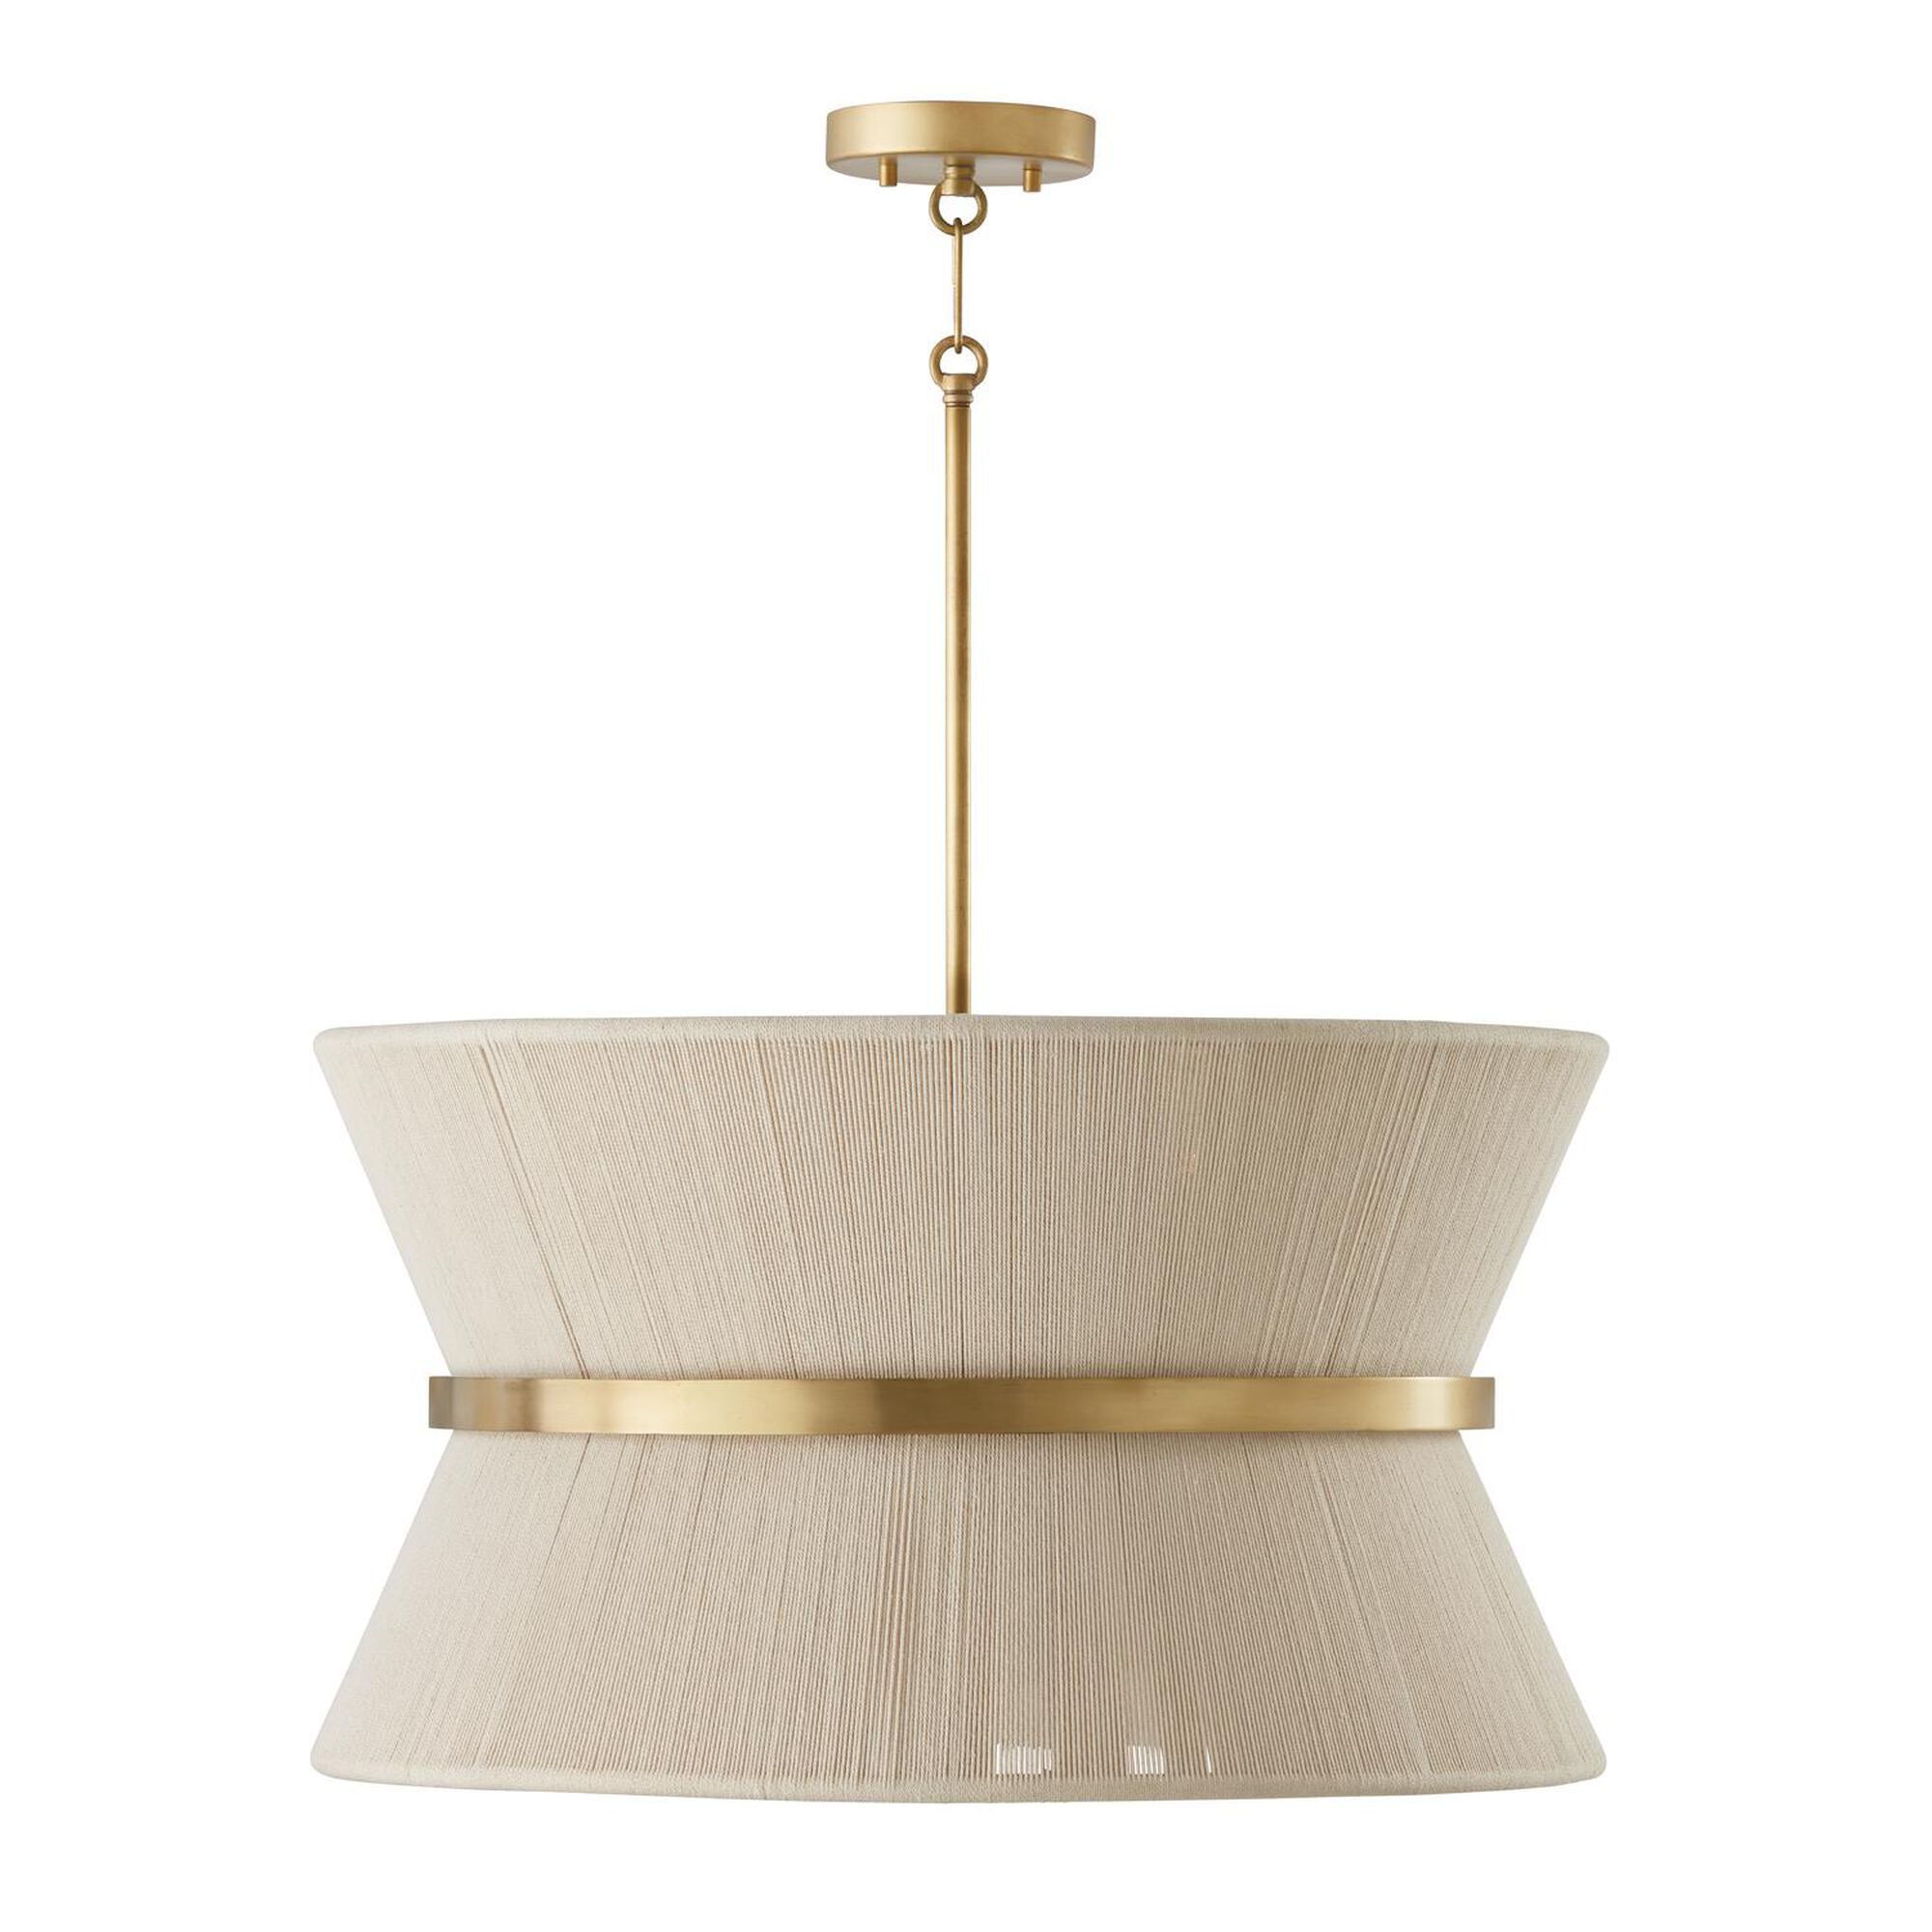 New




Cecilia 24 Inch Large Pendant by Capital Lighting Fixture Company

Capitol ID: 3626058
MF... | 1800 Lighting